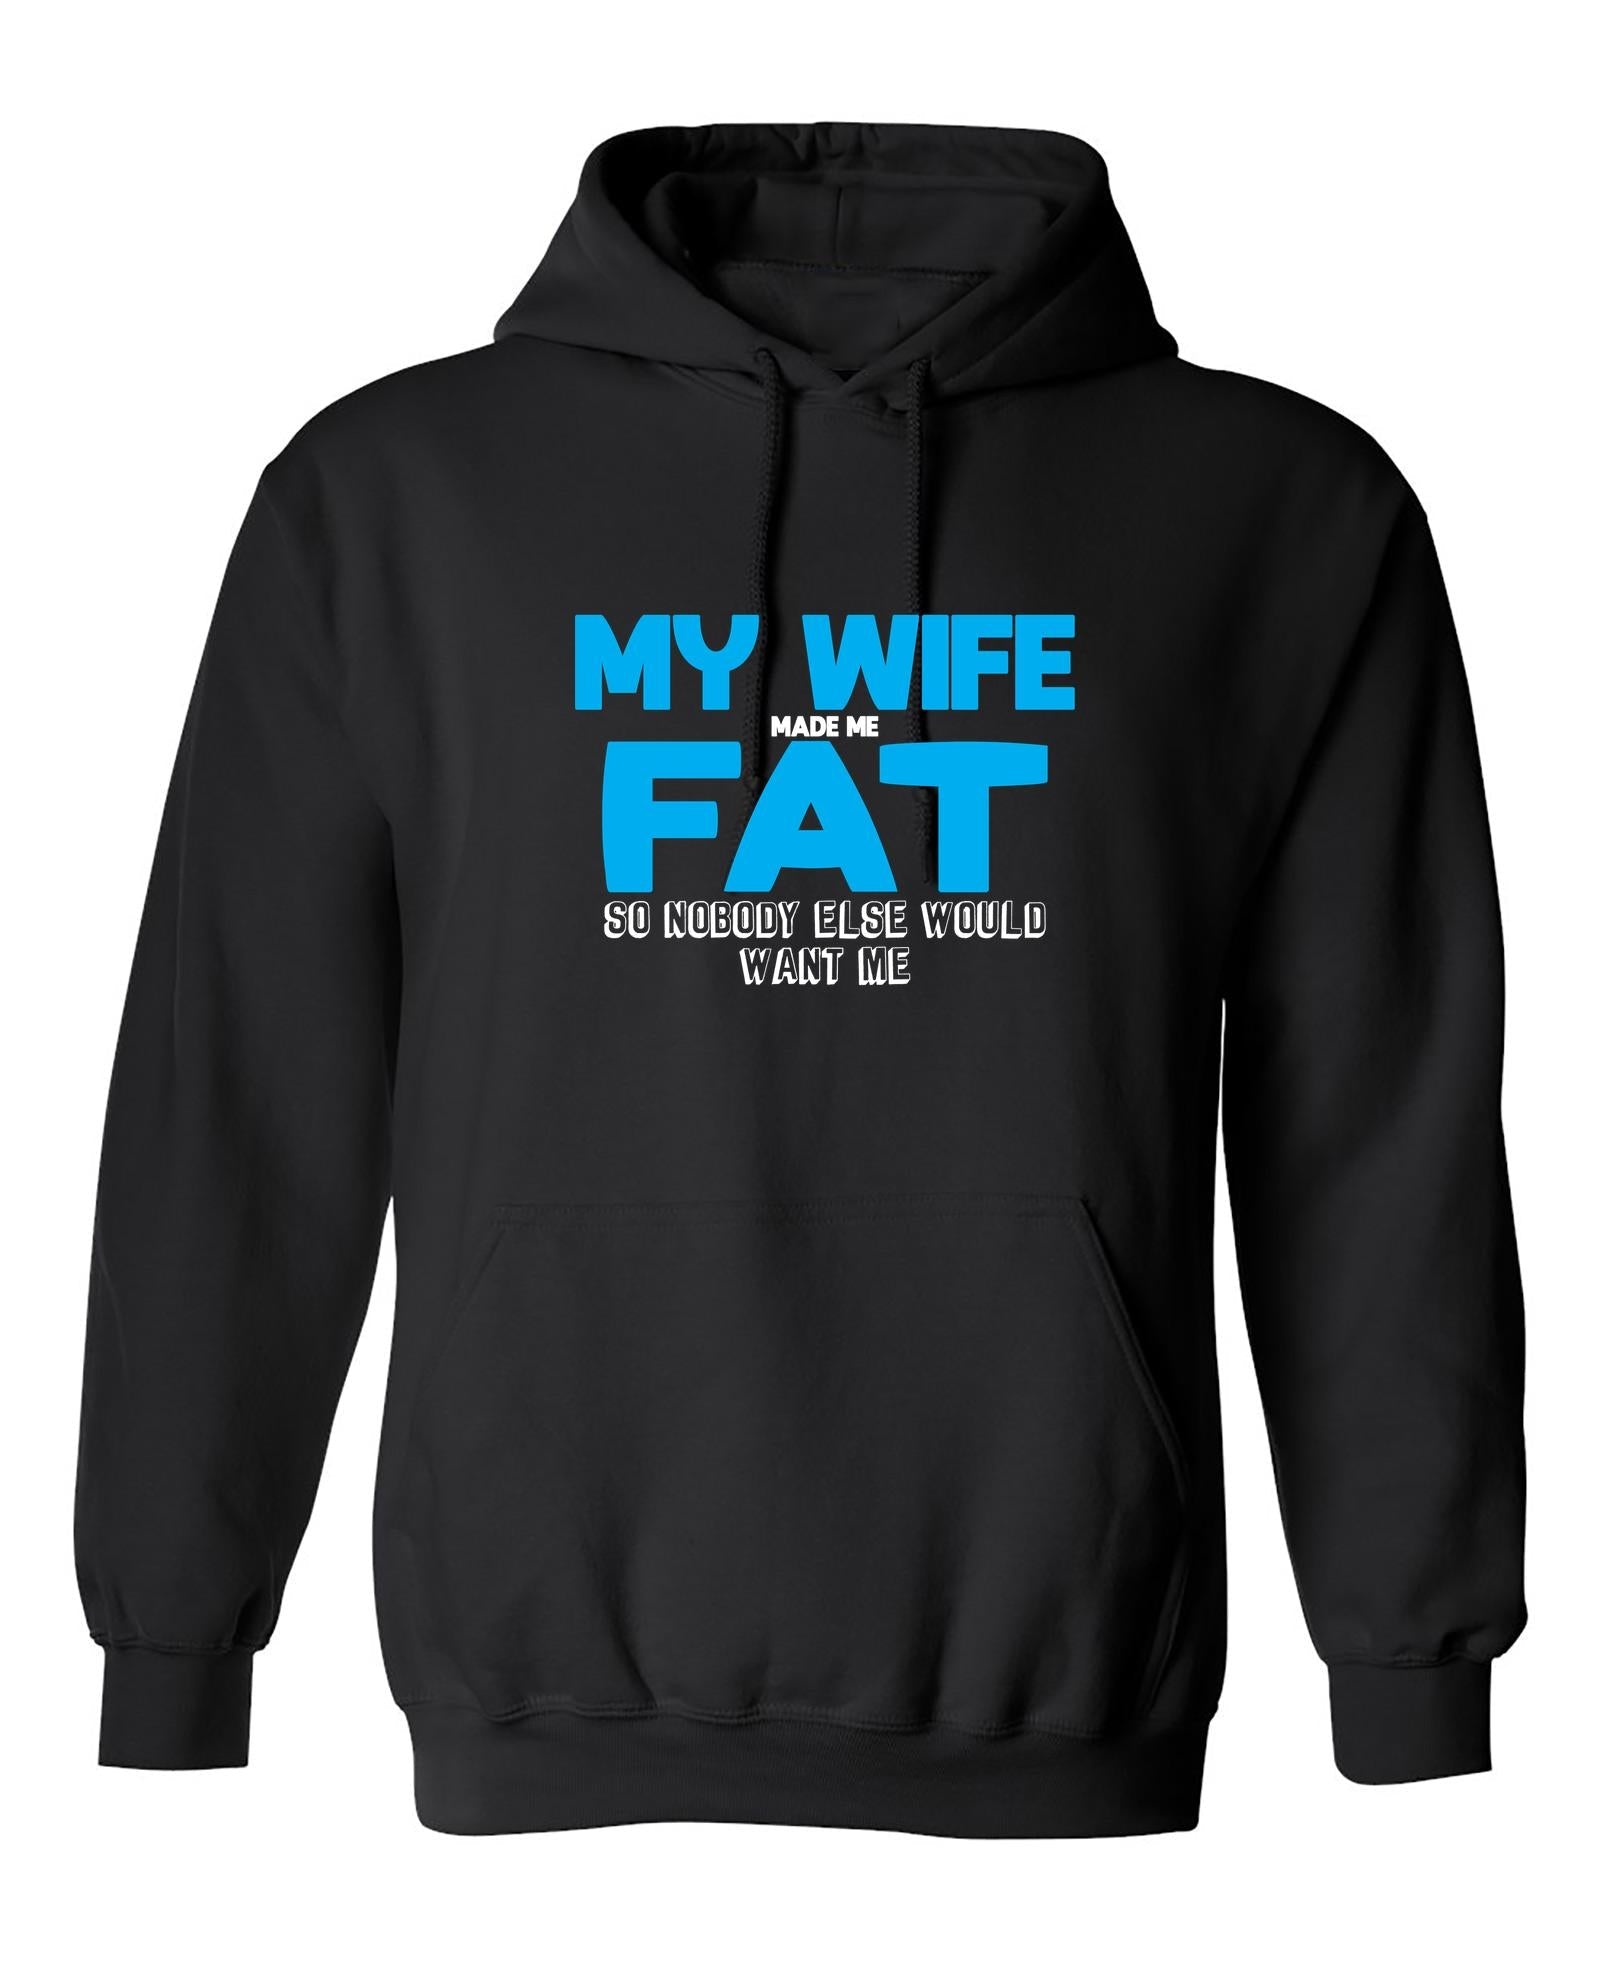 Funny T-Shirts design "My Wife Made me Fat, So Nobody else would want me"